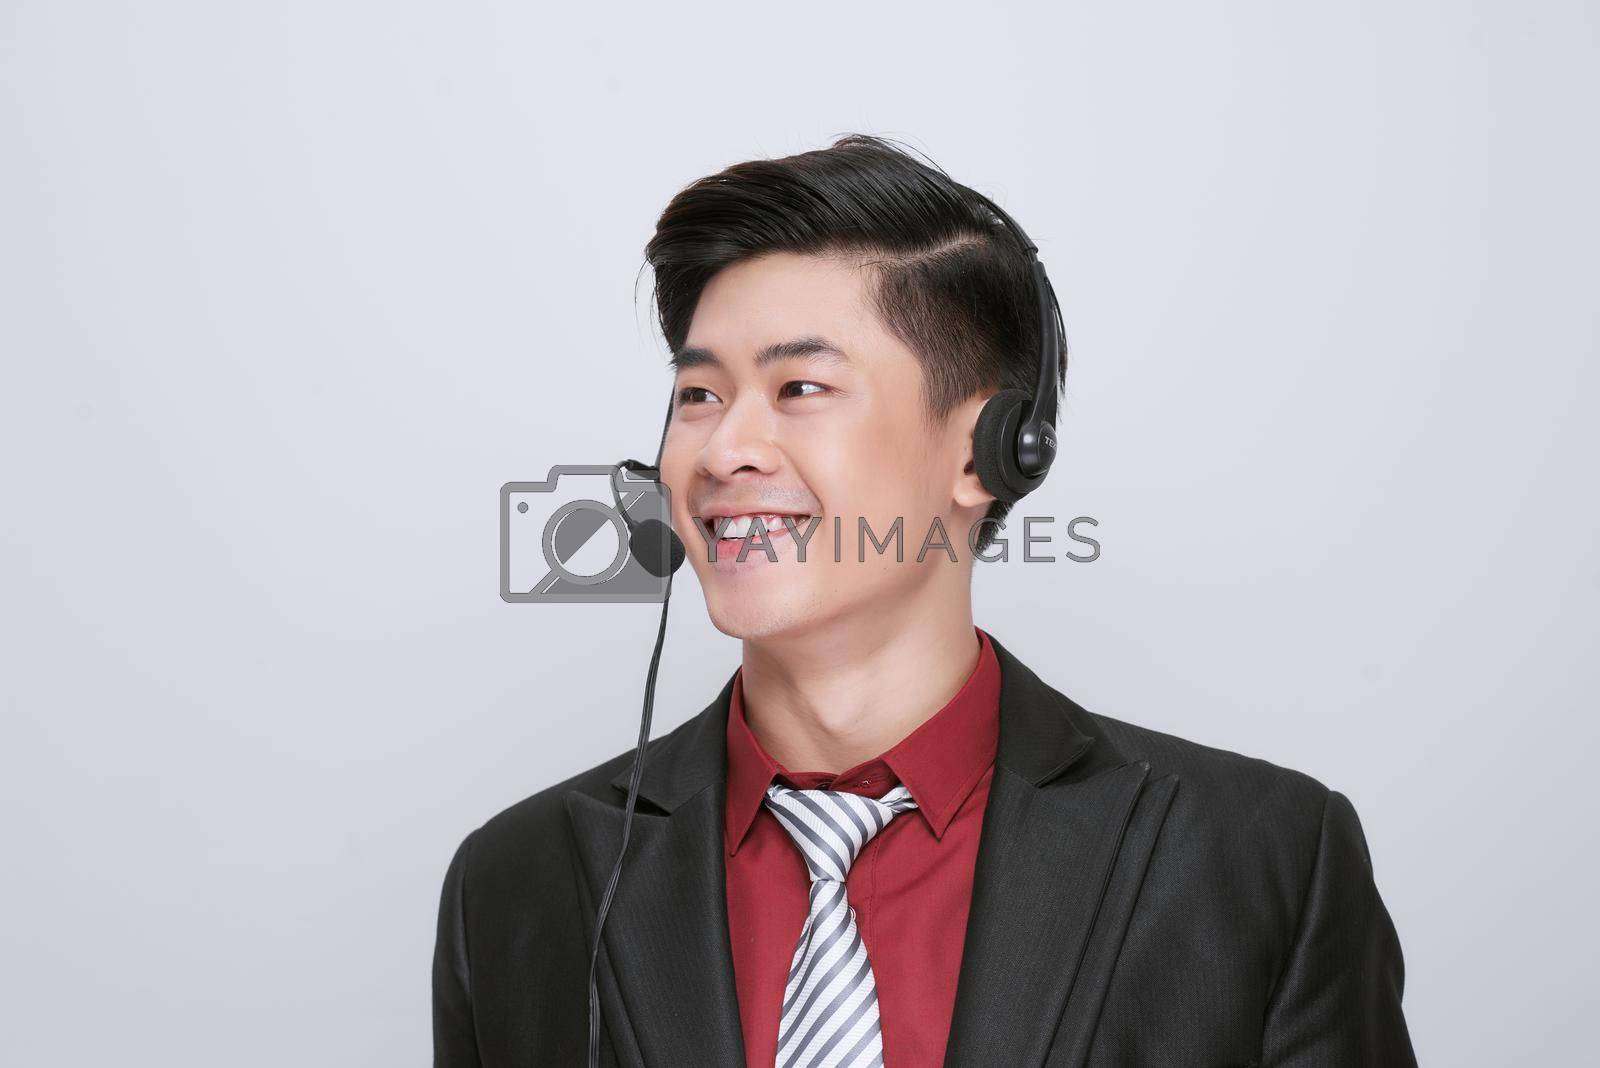 Royalty free image of Customer service representative wearing a headset on white by makidotvn